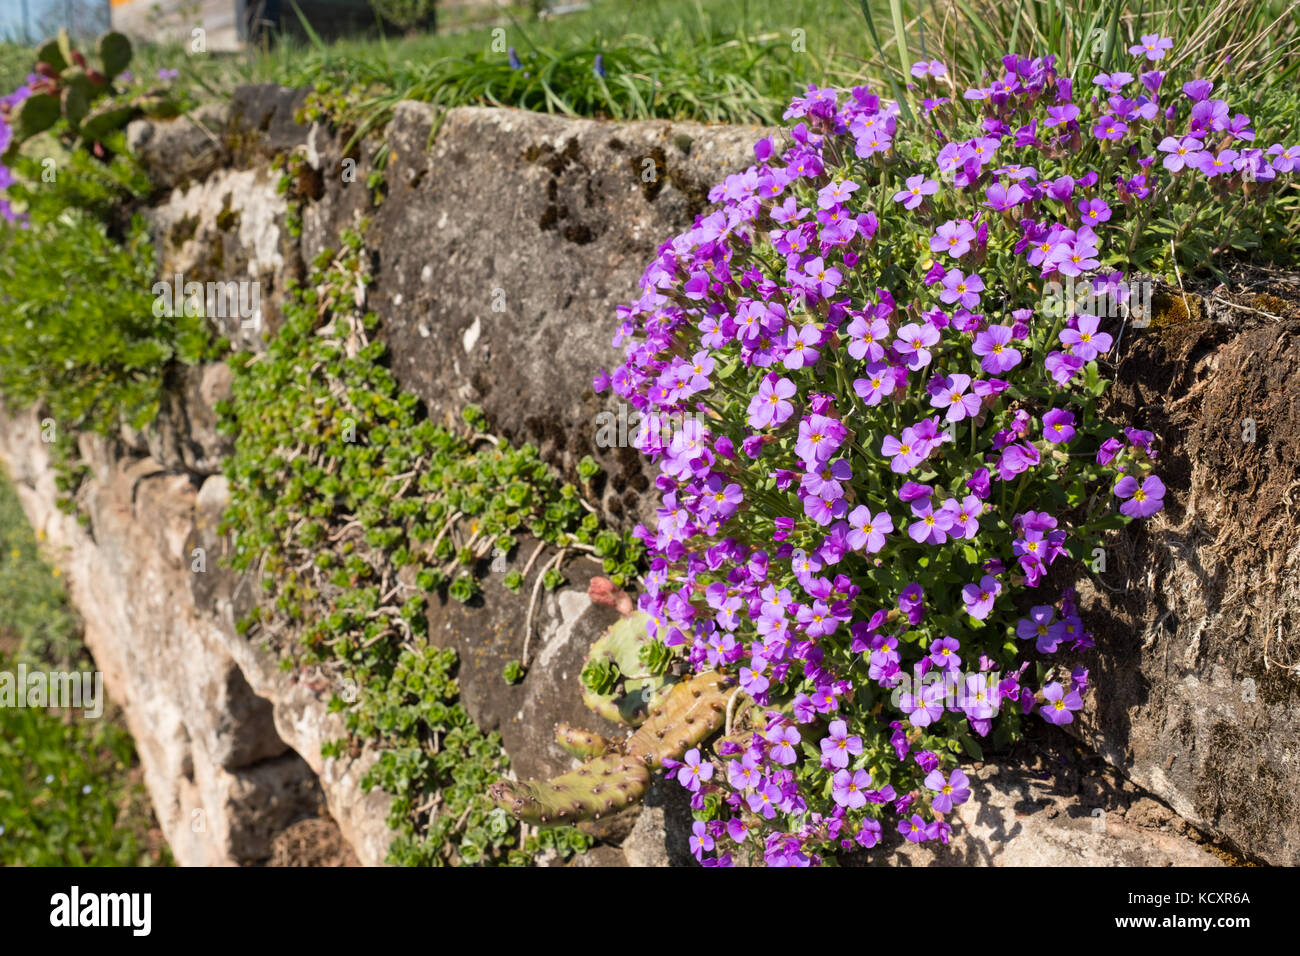 Purple rock cress (Aubrieta) with flowers at a stone wall Stock Photo